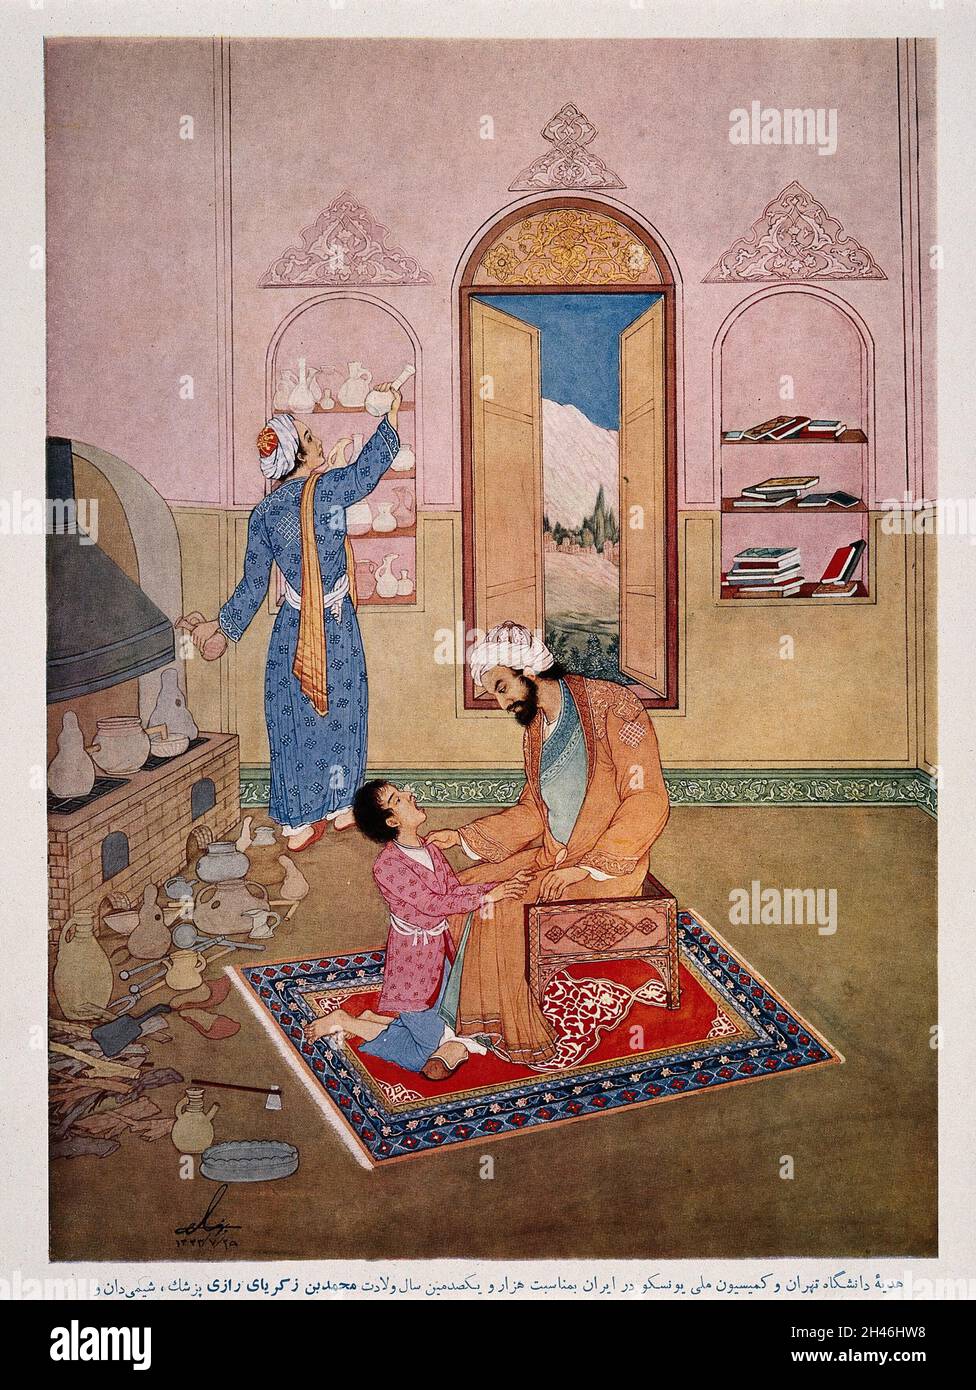 Rhazes (Rāzī), a physician, examines a kneeling boy who has his mouth wide open, they are in a surgery full of equipment. Colour process print after H. Behzad. Stock Photo